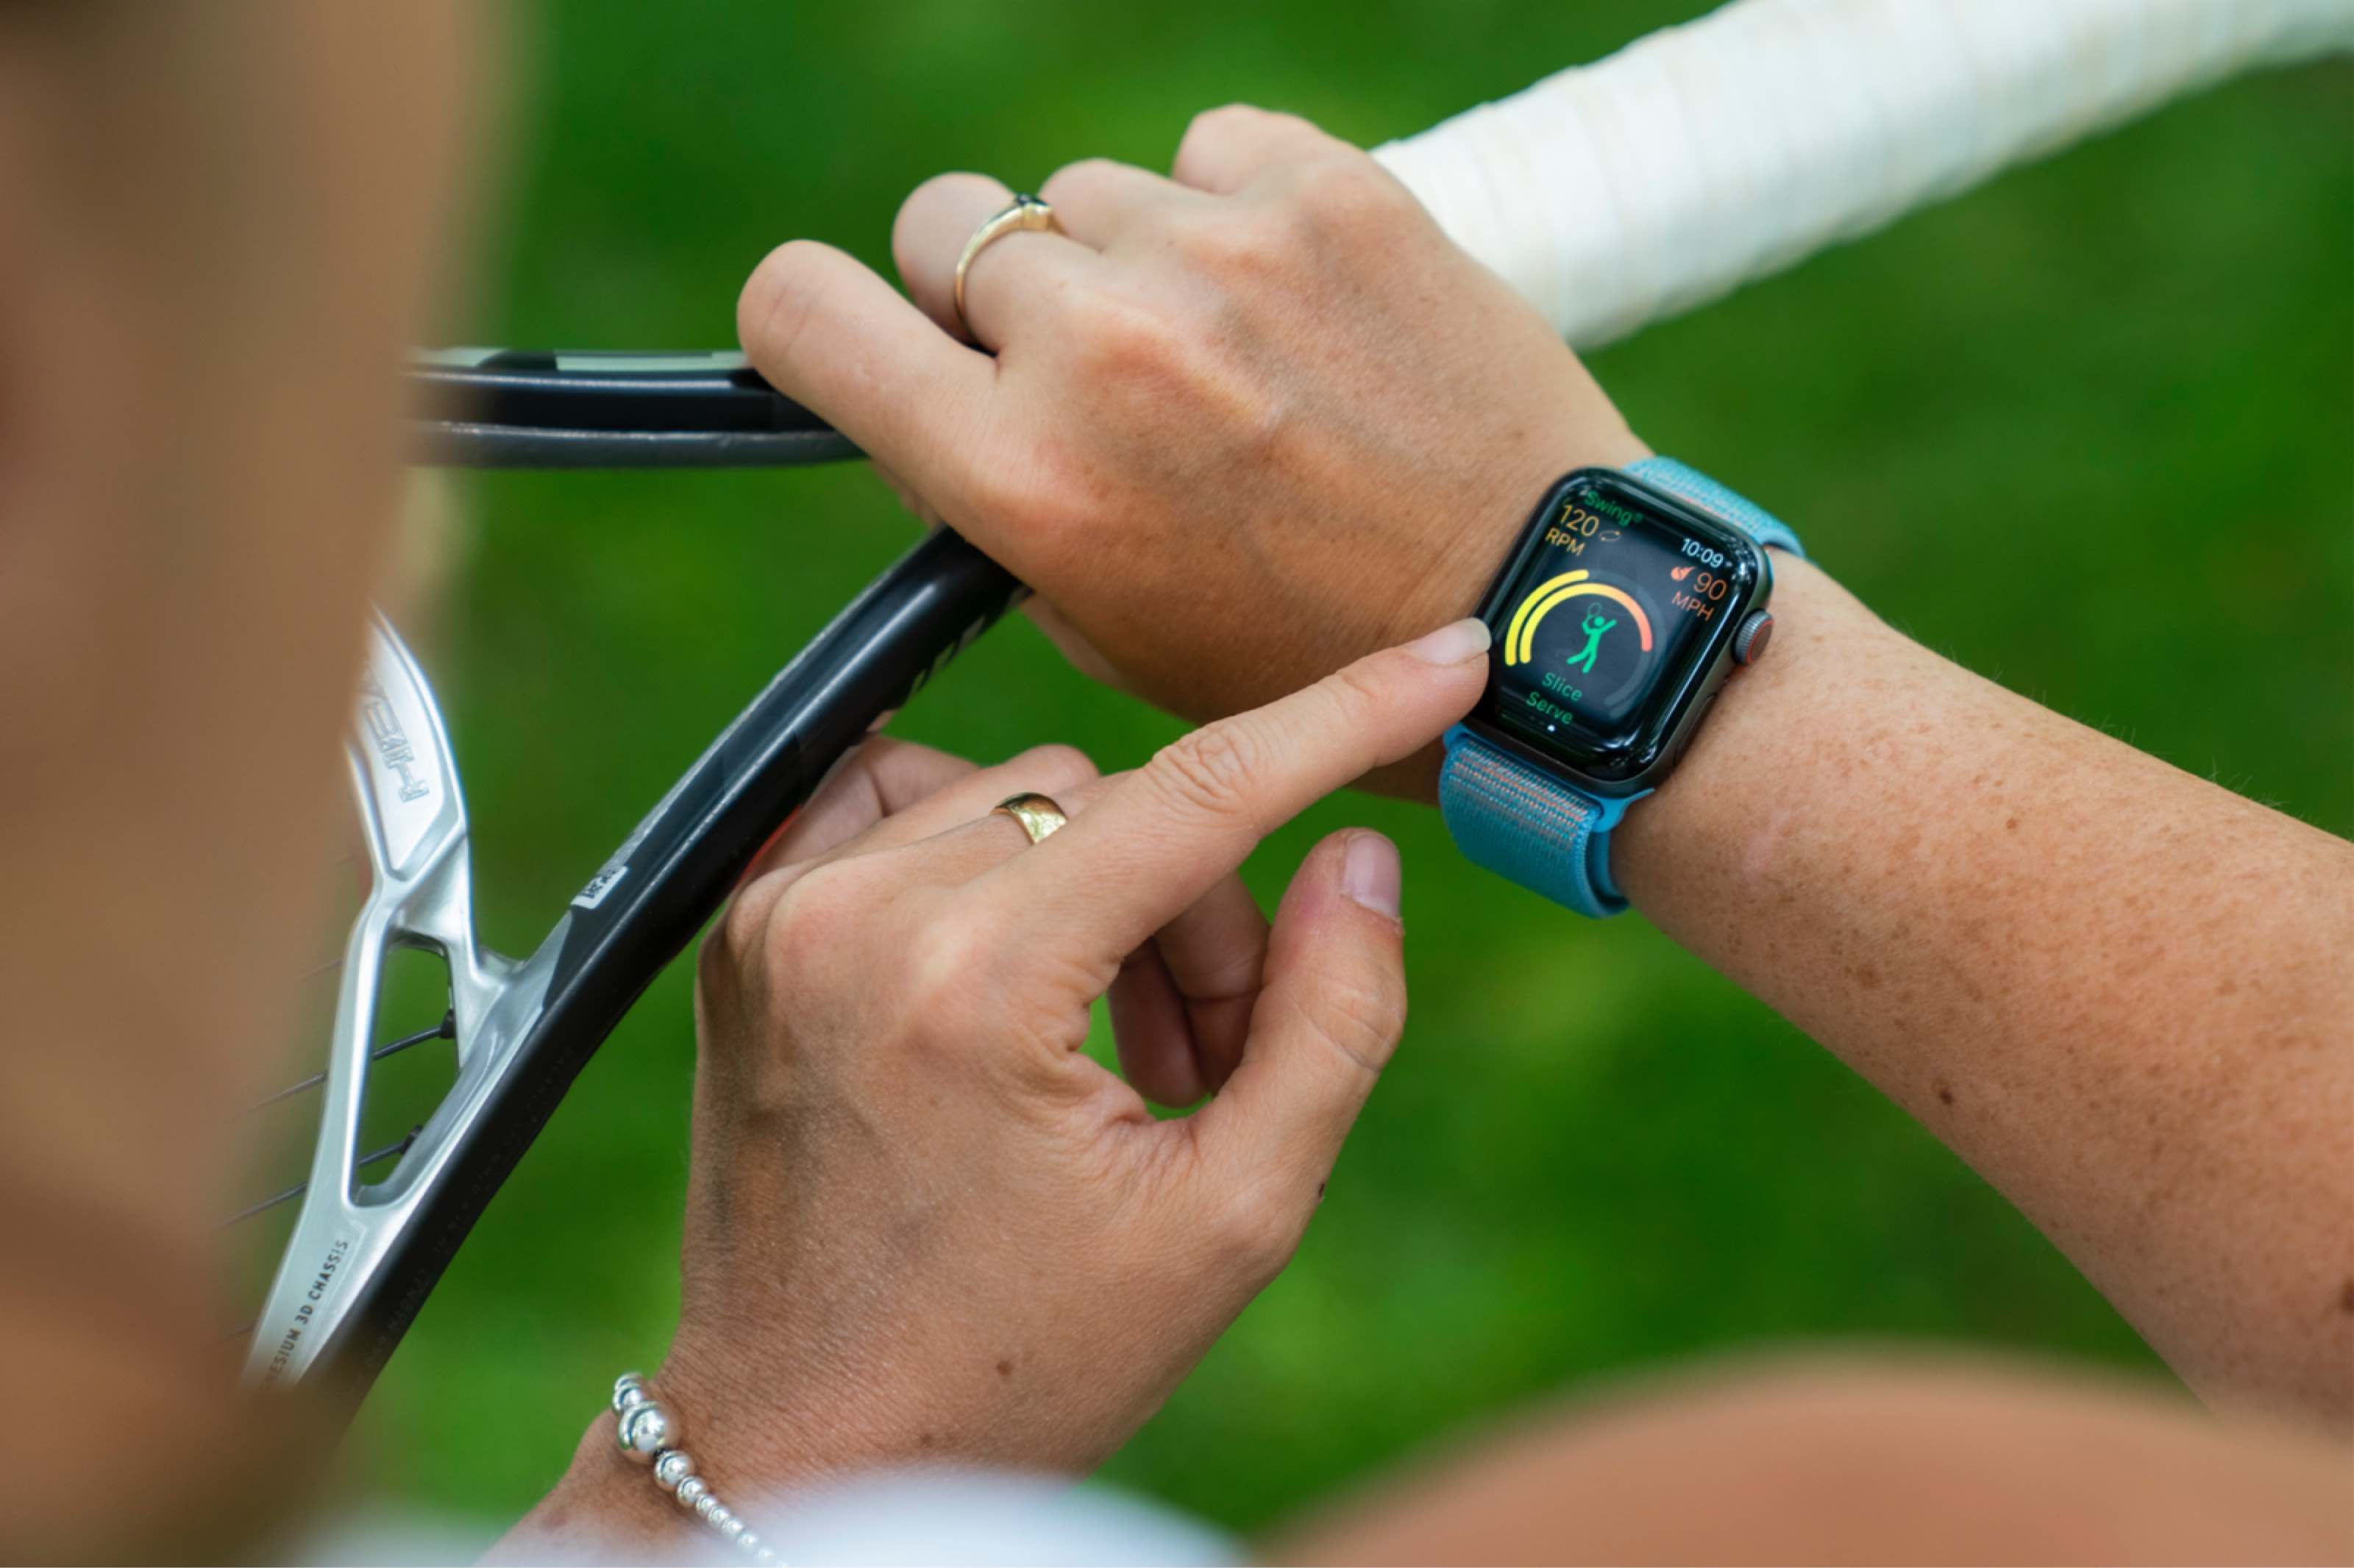 Swing The Apple Watch tennis app that will track your shots